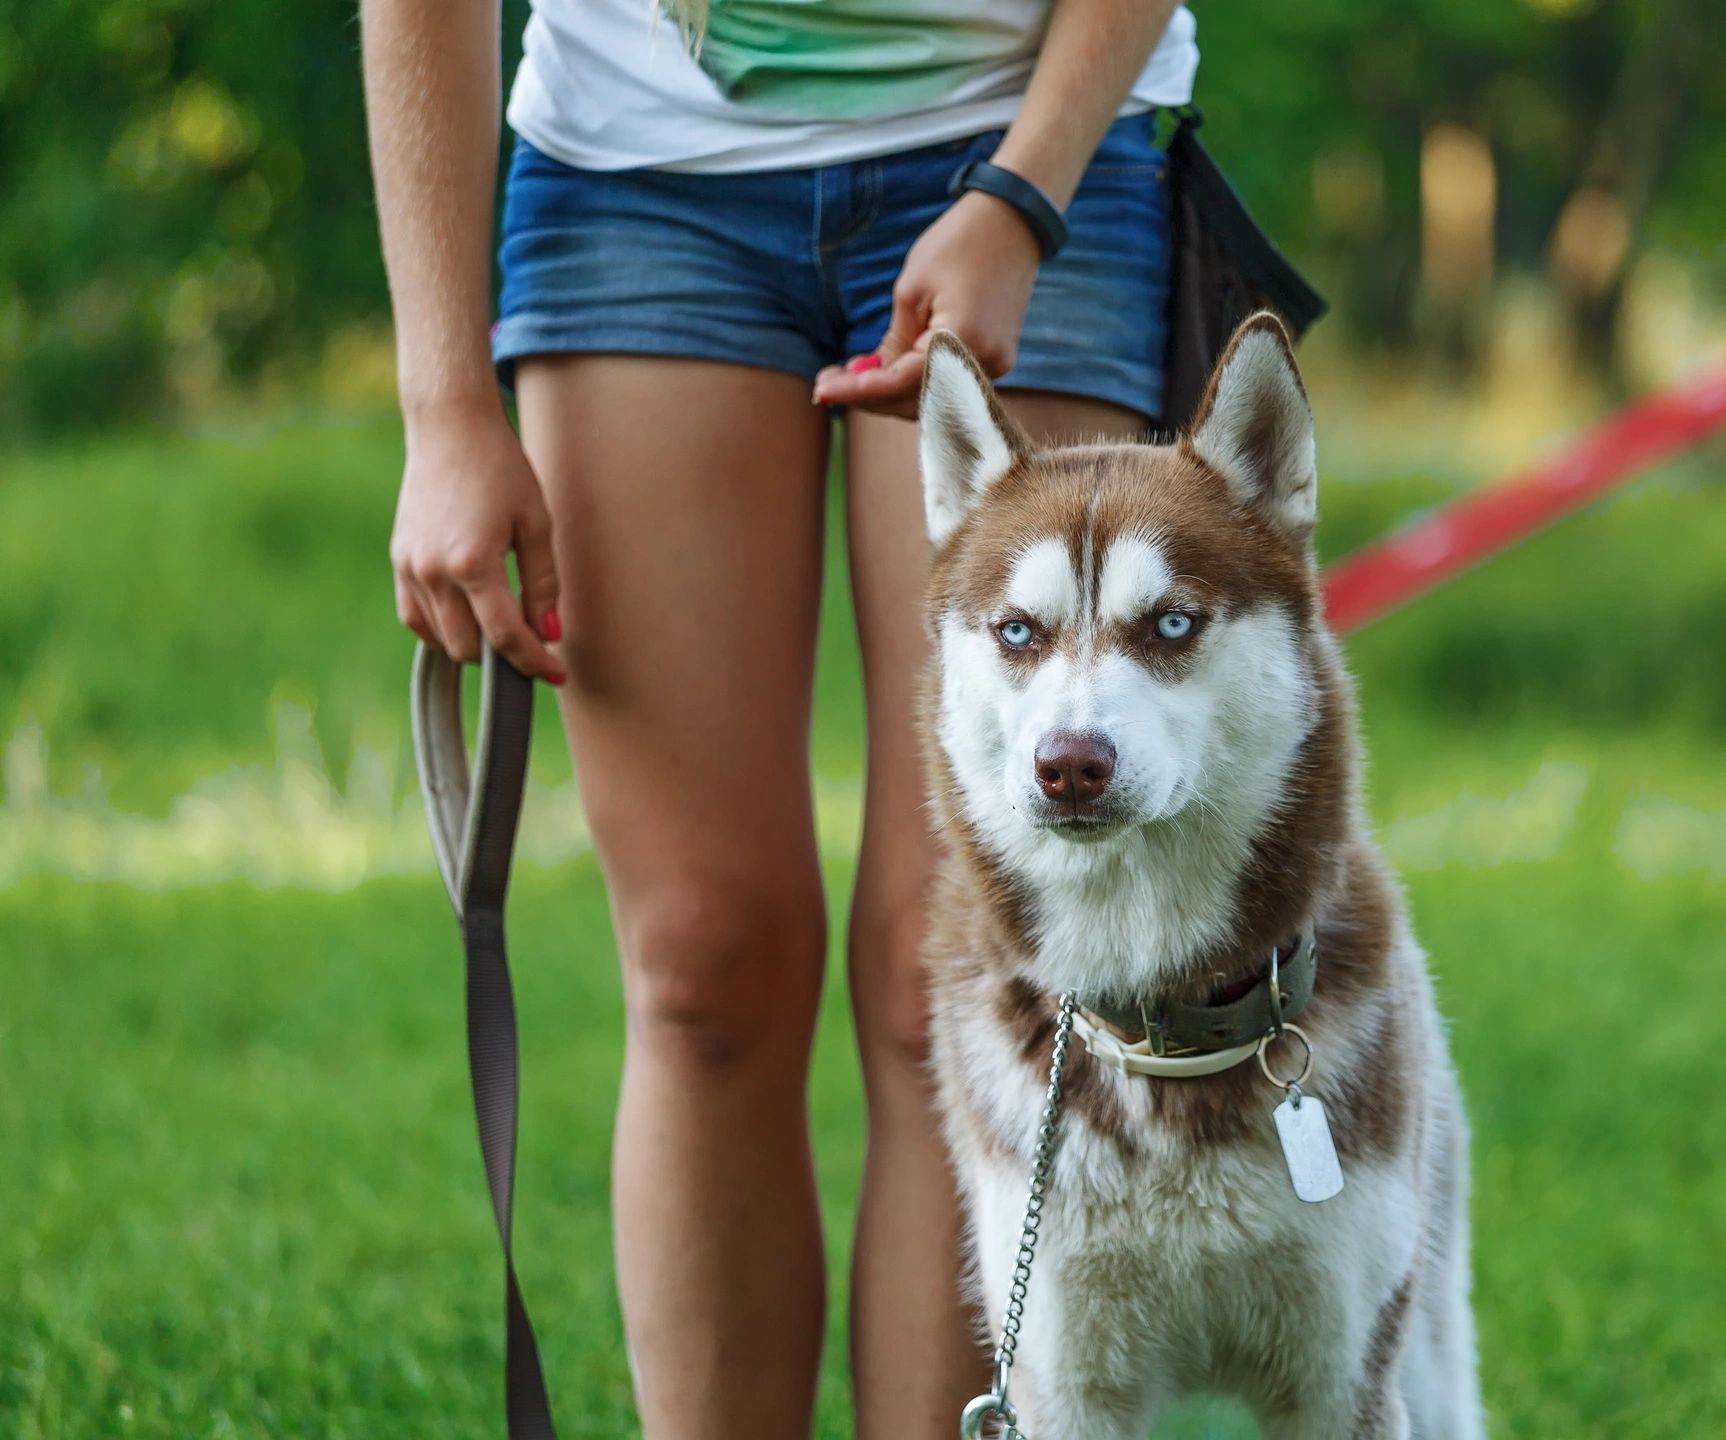 Husky dog trained to sit beside a person.
